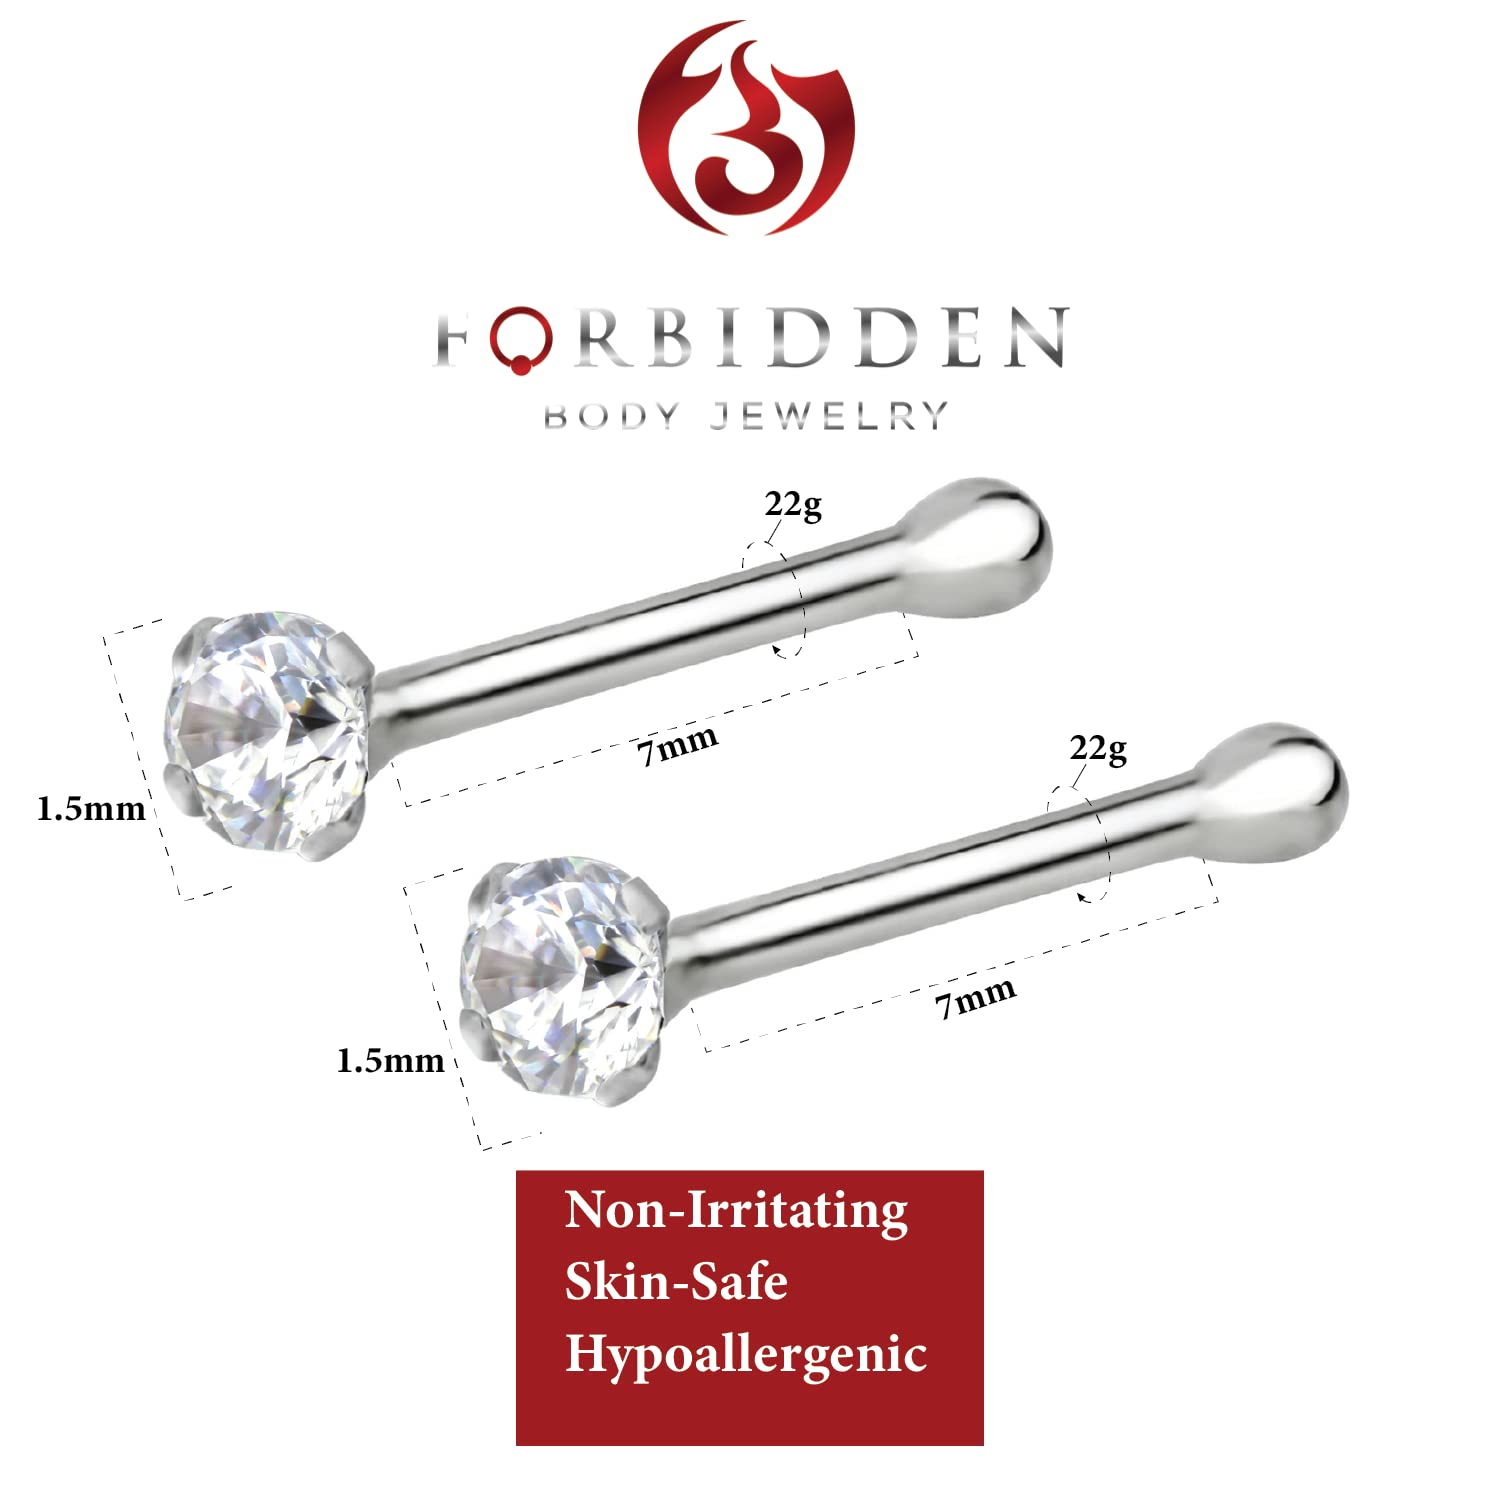 Forbidden Body Jewelry Nose Rings Sterling Silver Micro Nose Studs CZ Simulated Diamond Bone Stud for Women Men 1.5 mm Crystal 22G